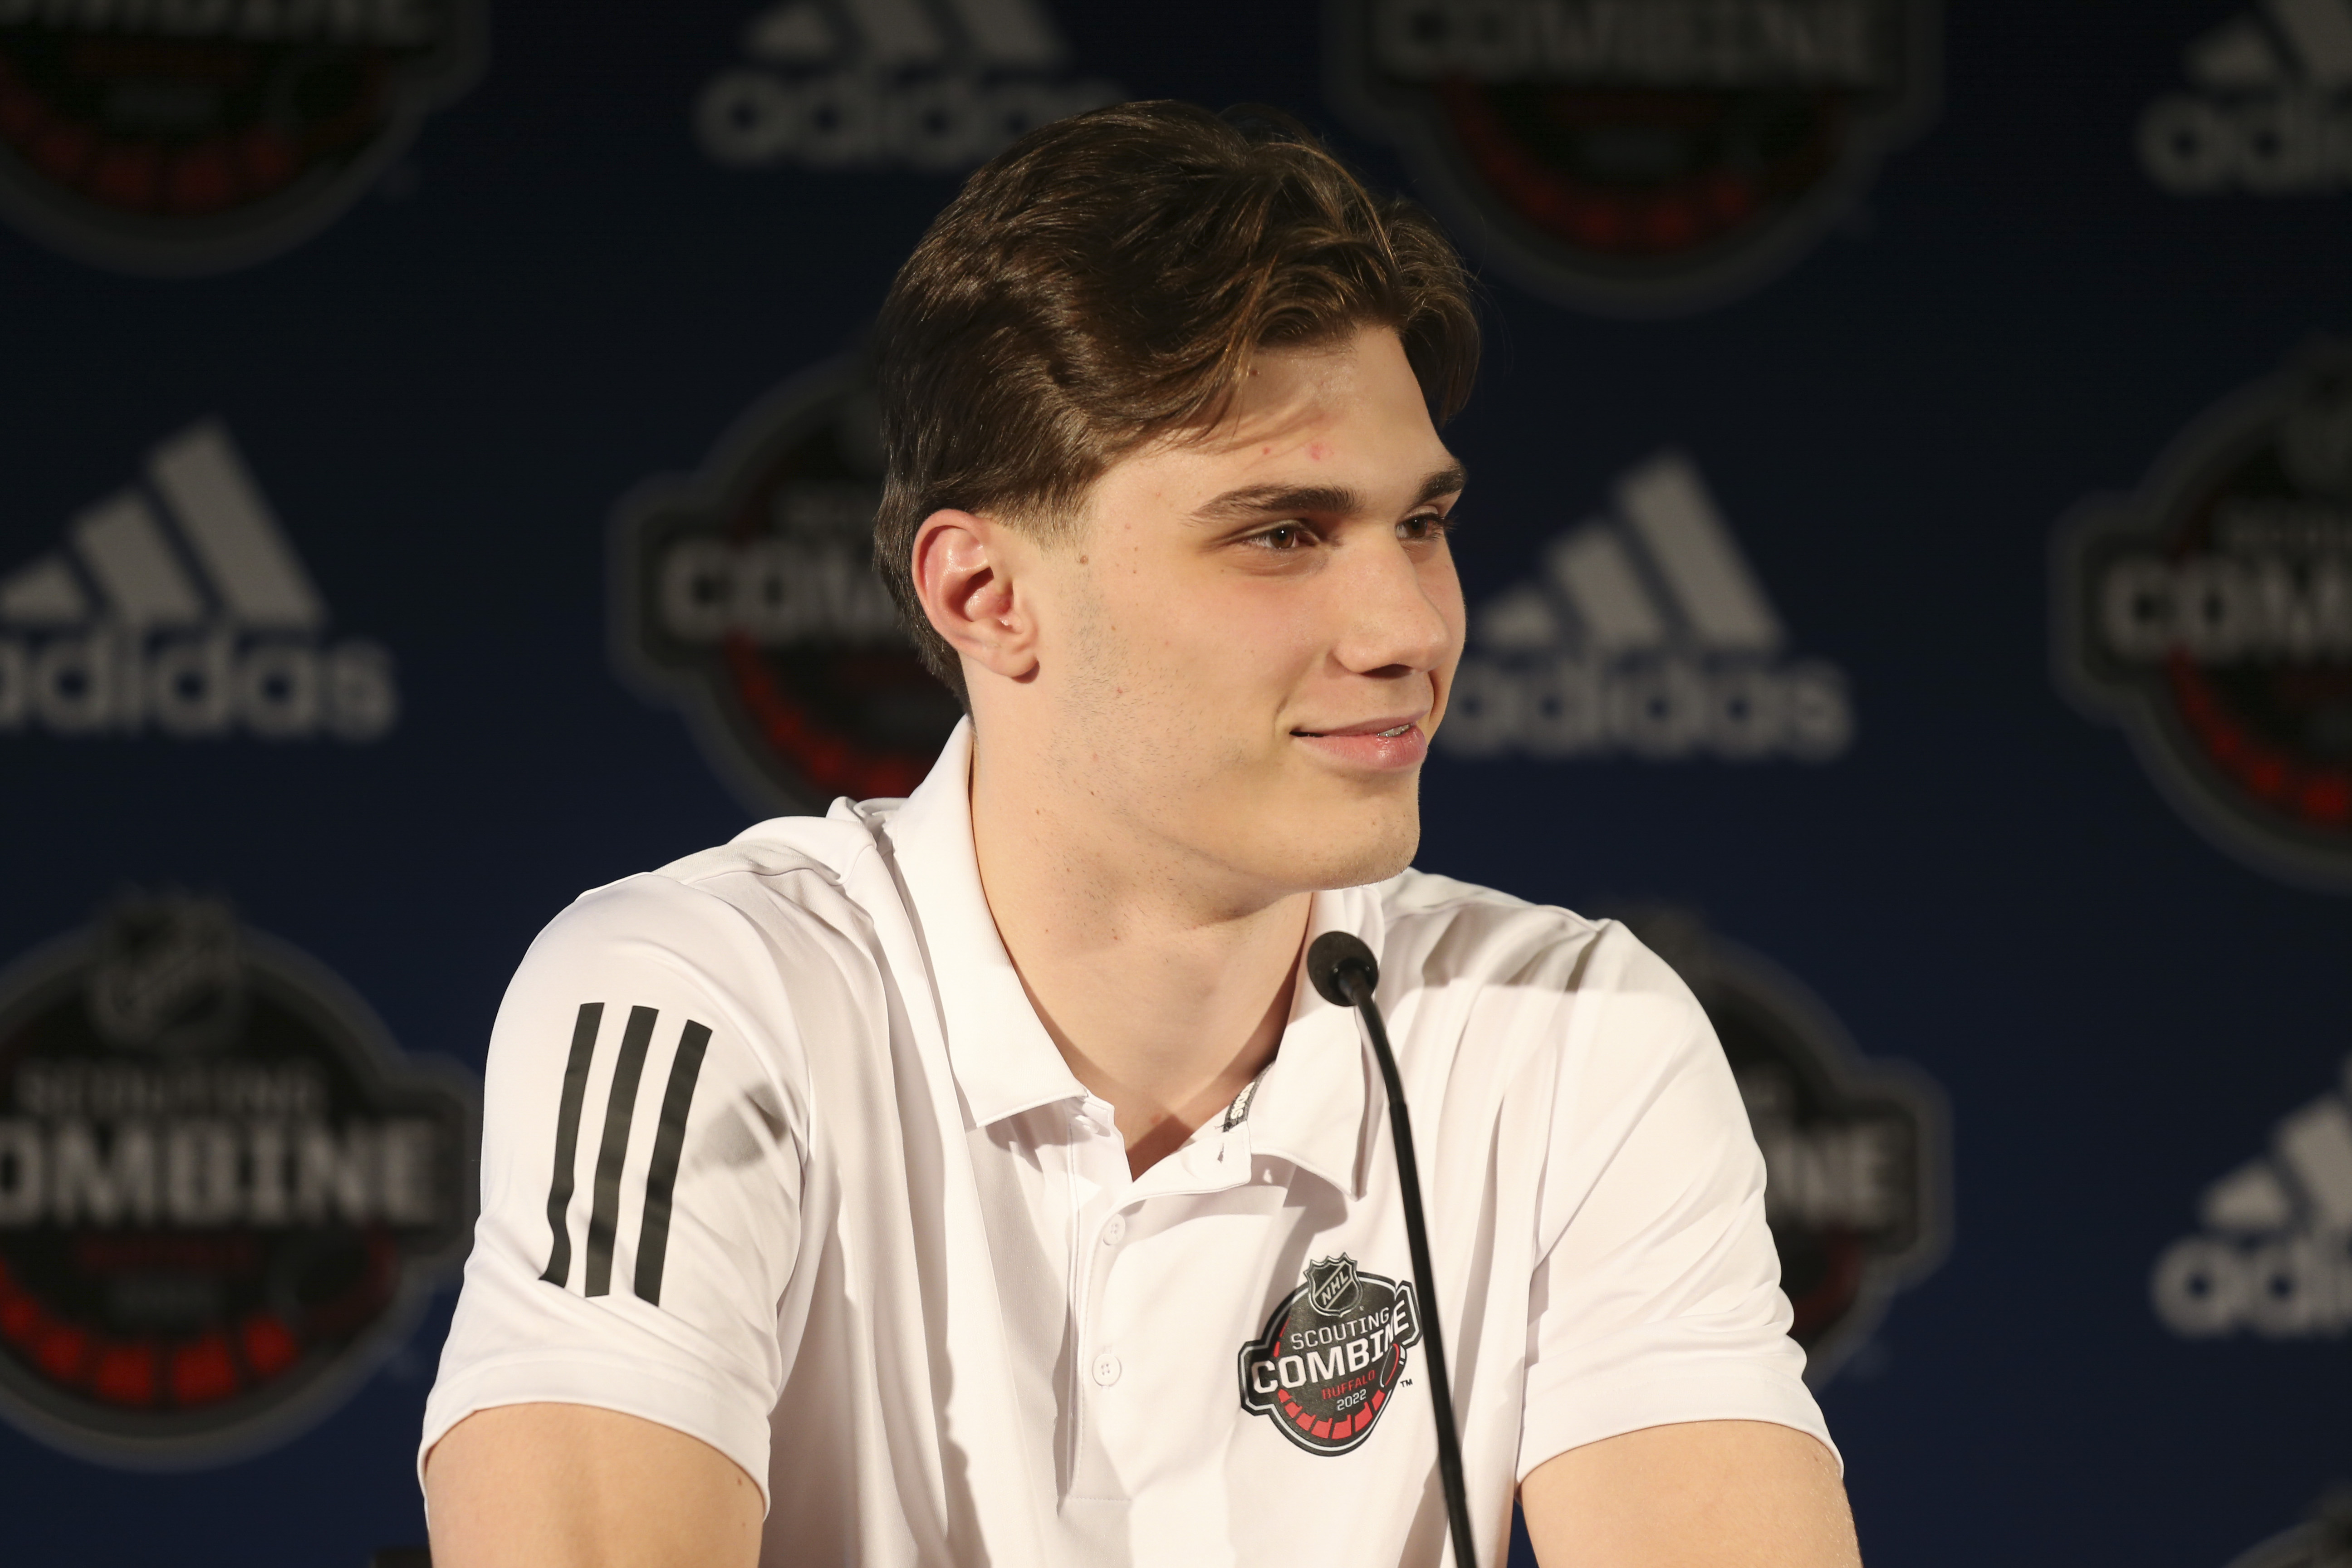 2022 NHL Scouting Combine - Top Prospects Media Availability